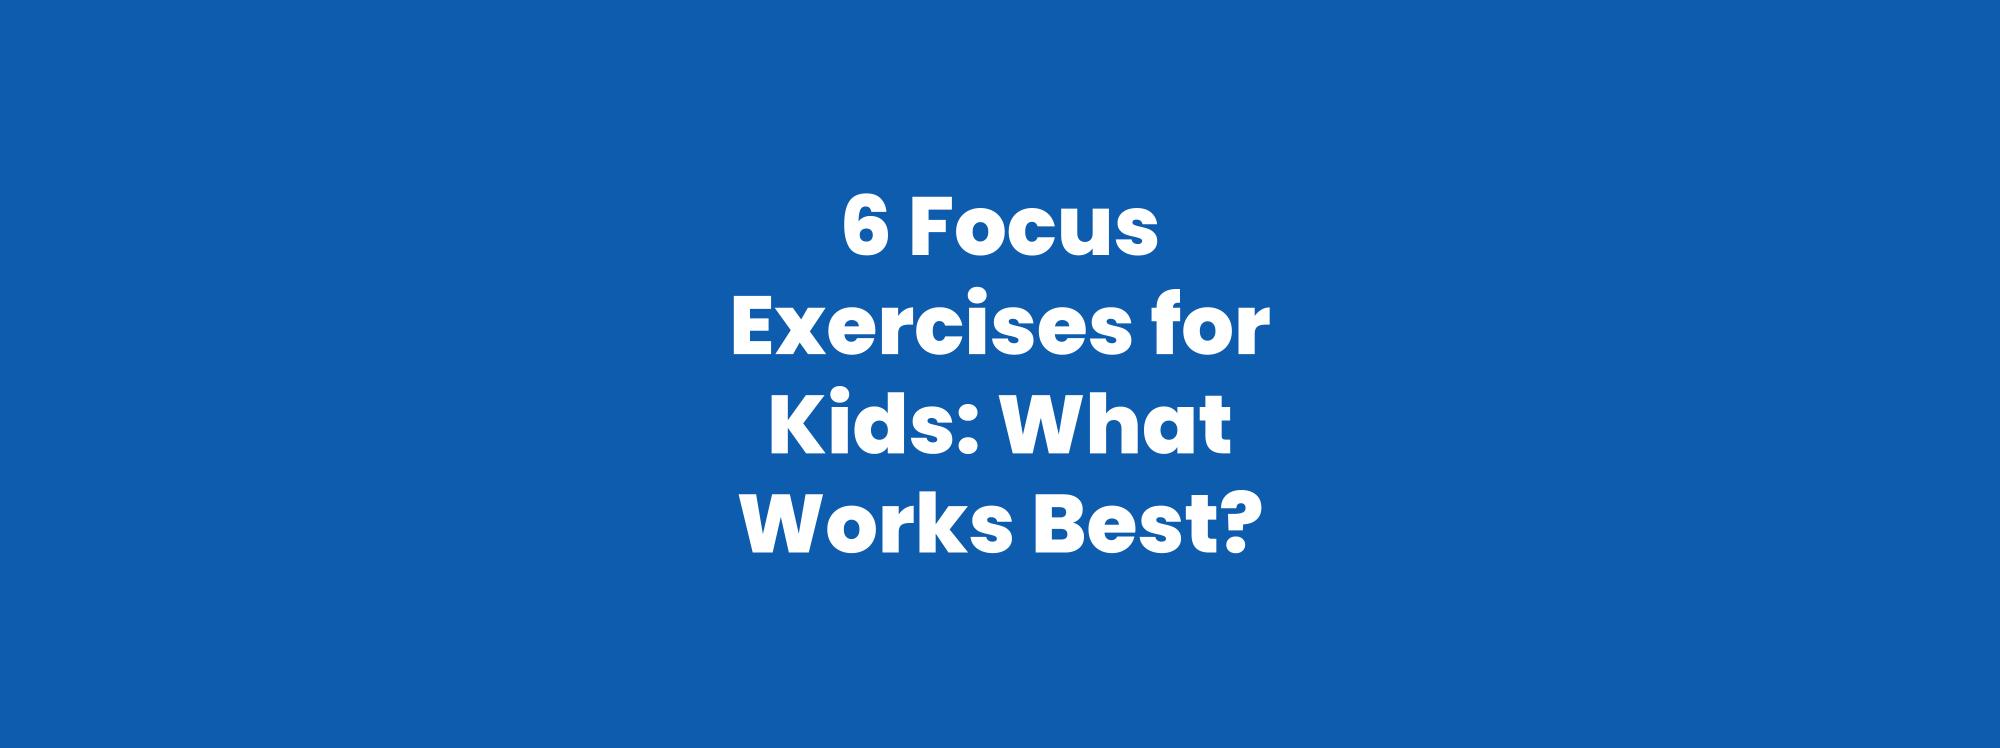 6 Focus Exercises for Kids: What Works Best?